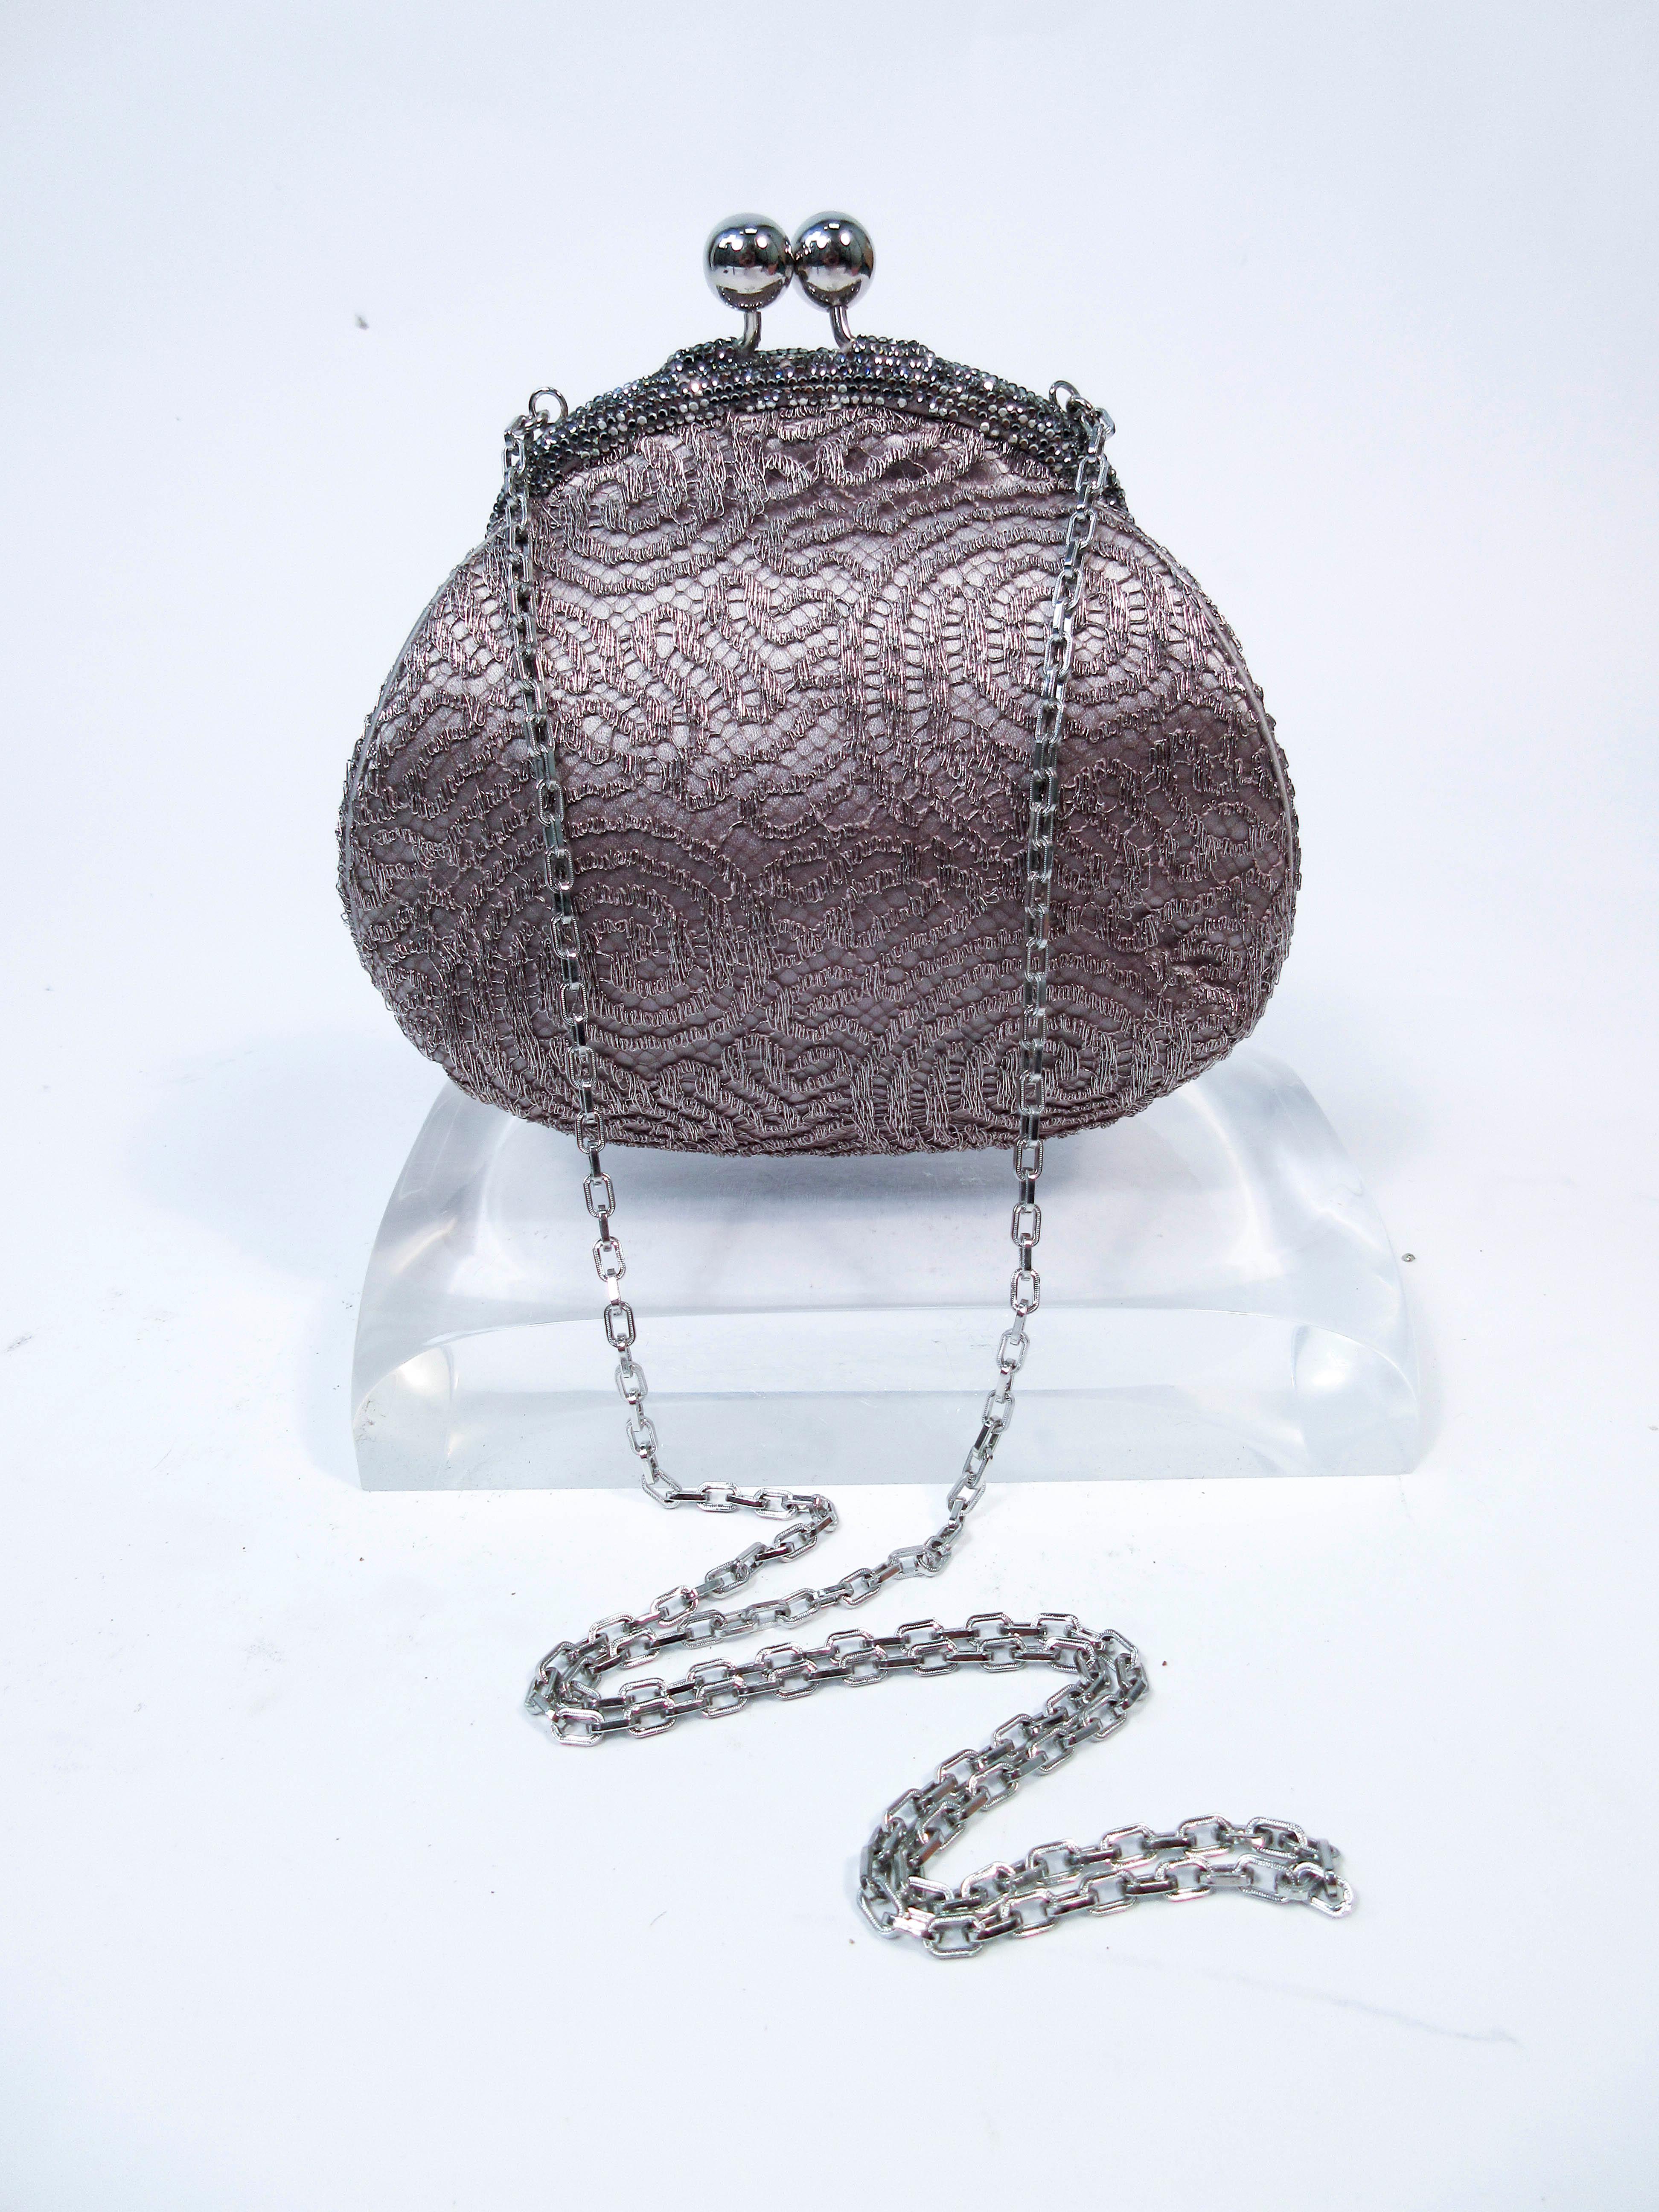 This Judith Leiber purse is composed of a metallic silver-tone taupe lame.  Features a silver-tone frame with rhinestone accents and an interior pocket. In excellent almost new pre-owned condition (some signs of wear due to age, see photos). Sold